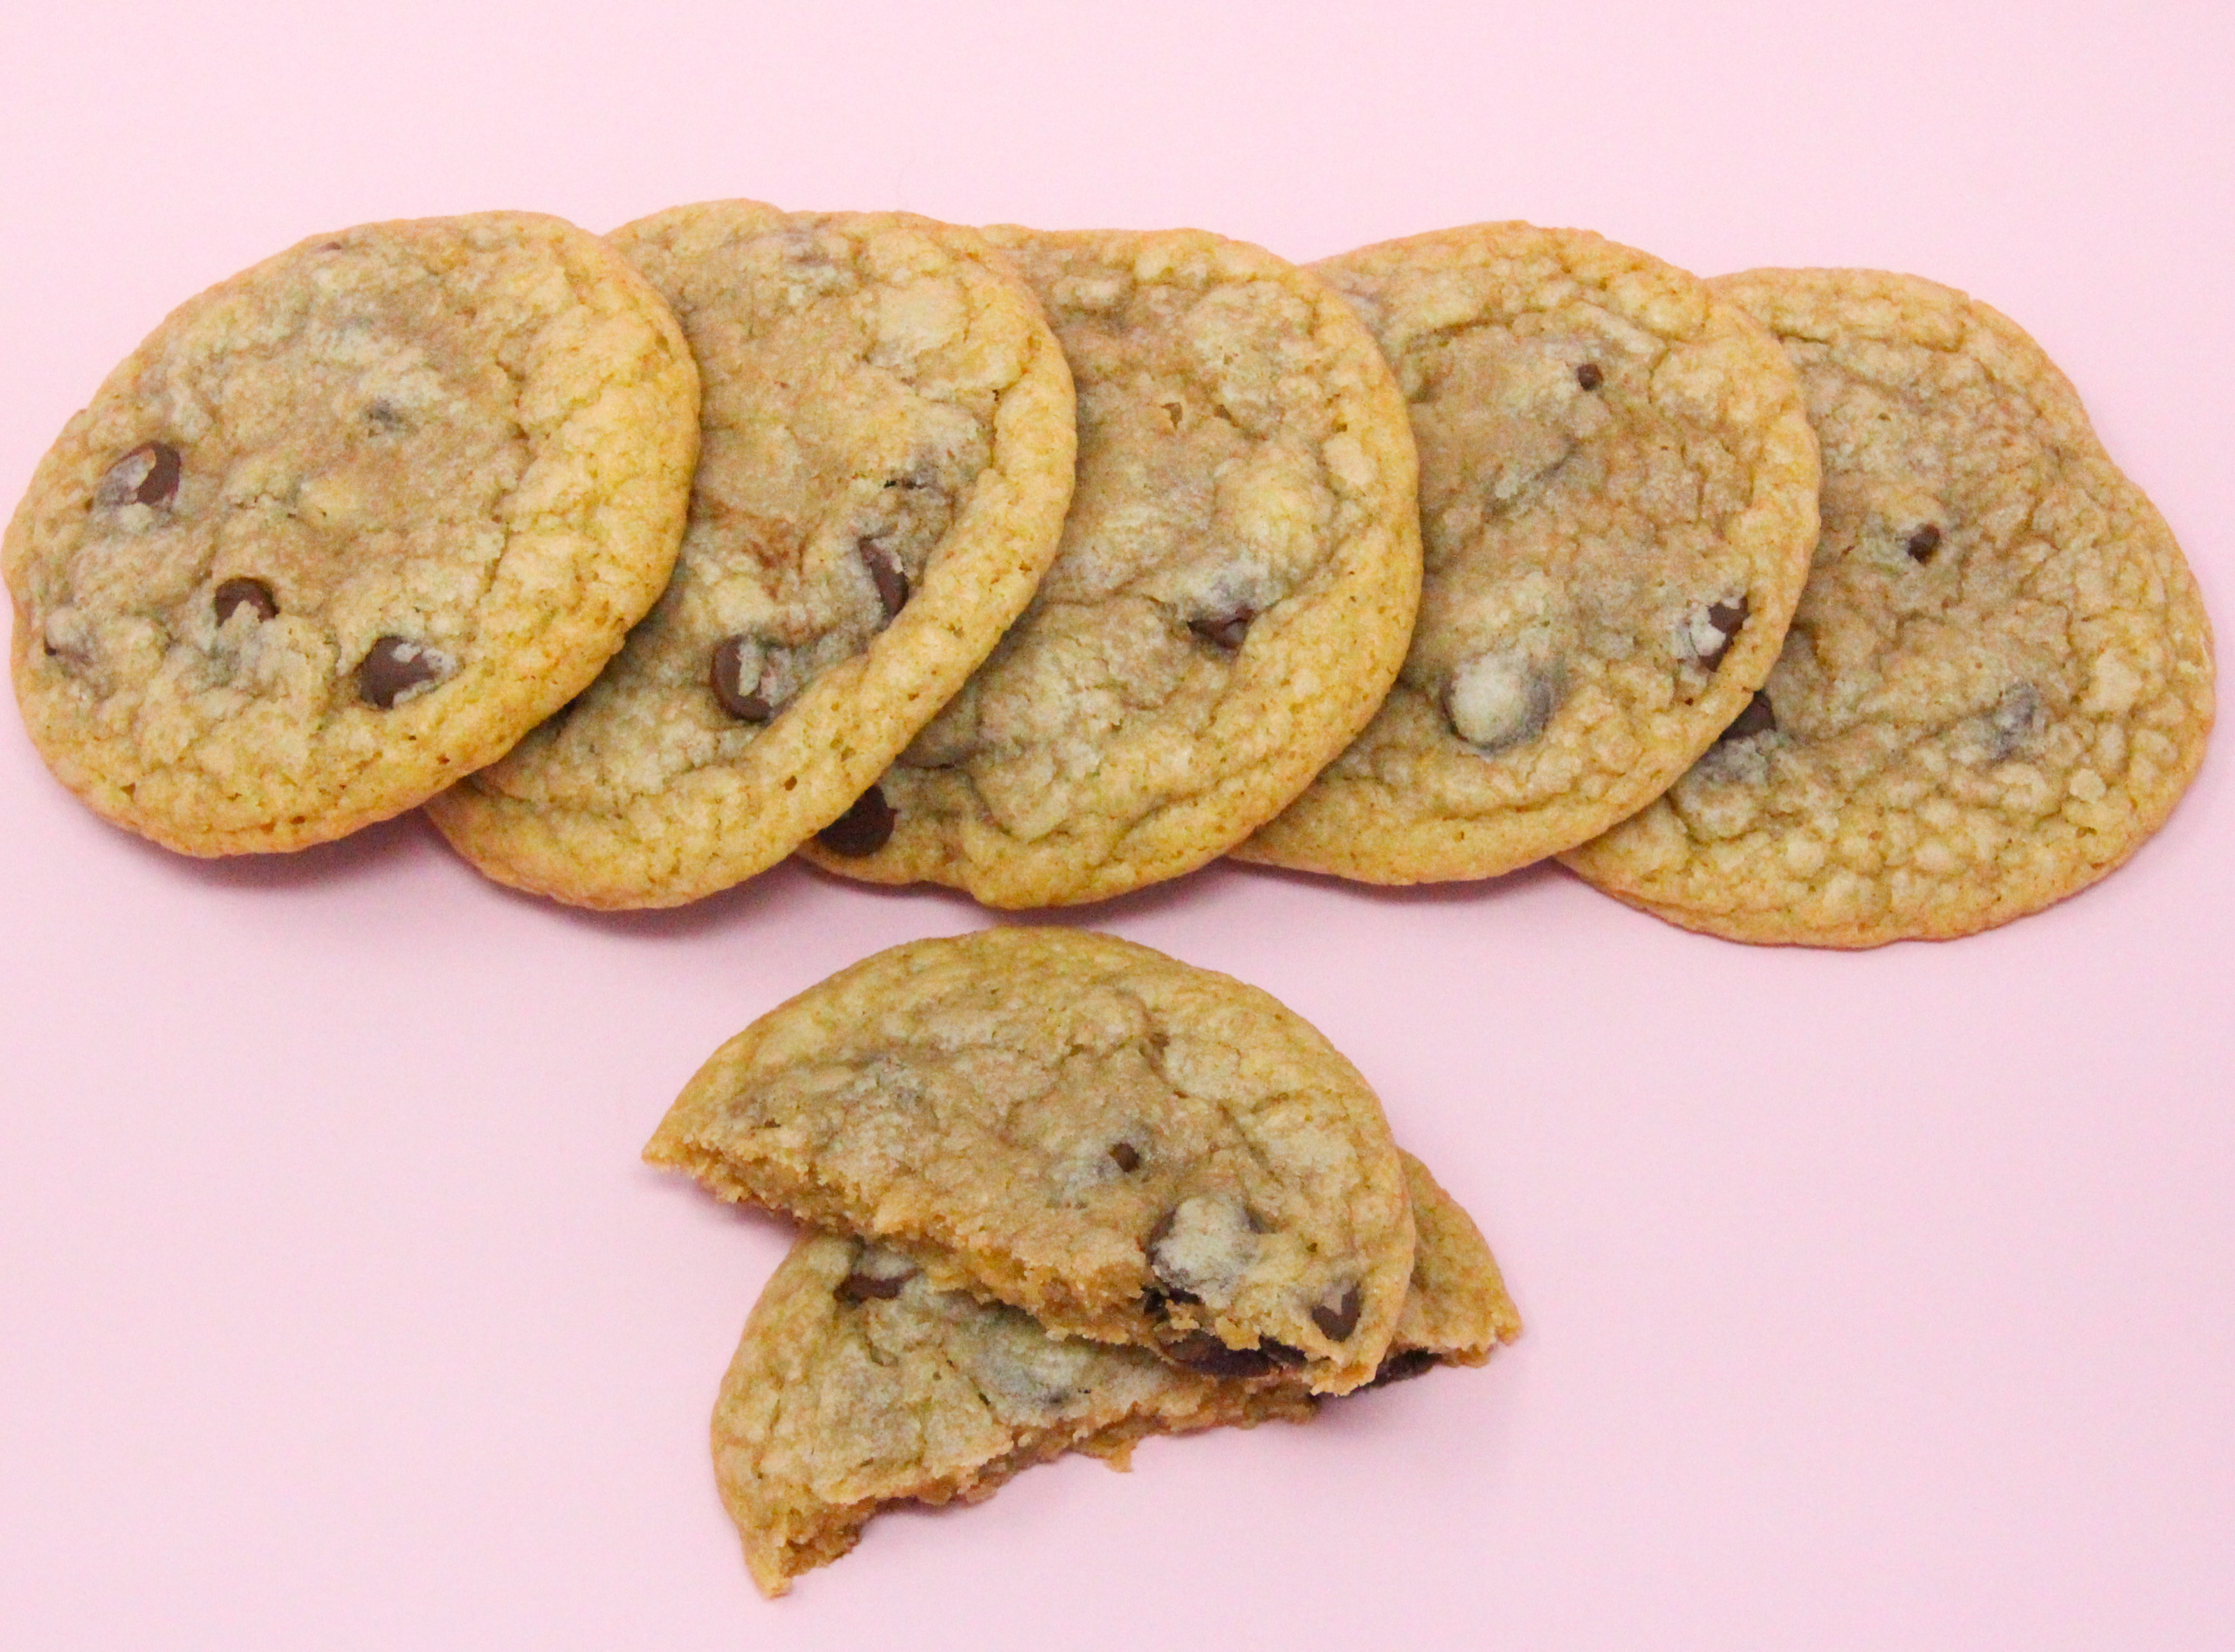 Soft Chocolate Chip Cookies are extra large and extra delicious! Perfect for an afternoon treat with a cold glass of milk or a steaming cup of tea! Recipe shared with permission granted by Vicki Delany/Ava Gates, author of THE STRANGER IN THE LIBRARY. 